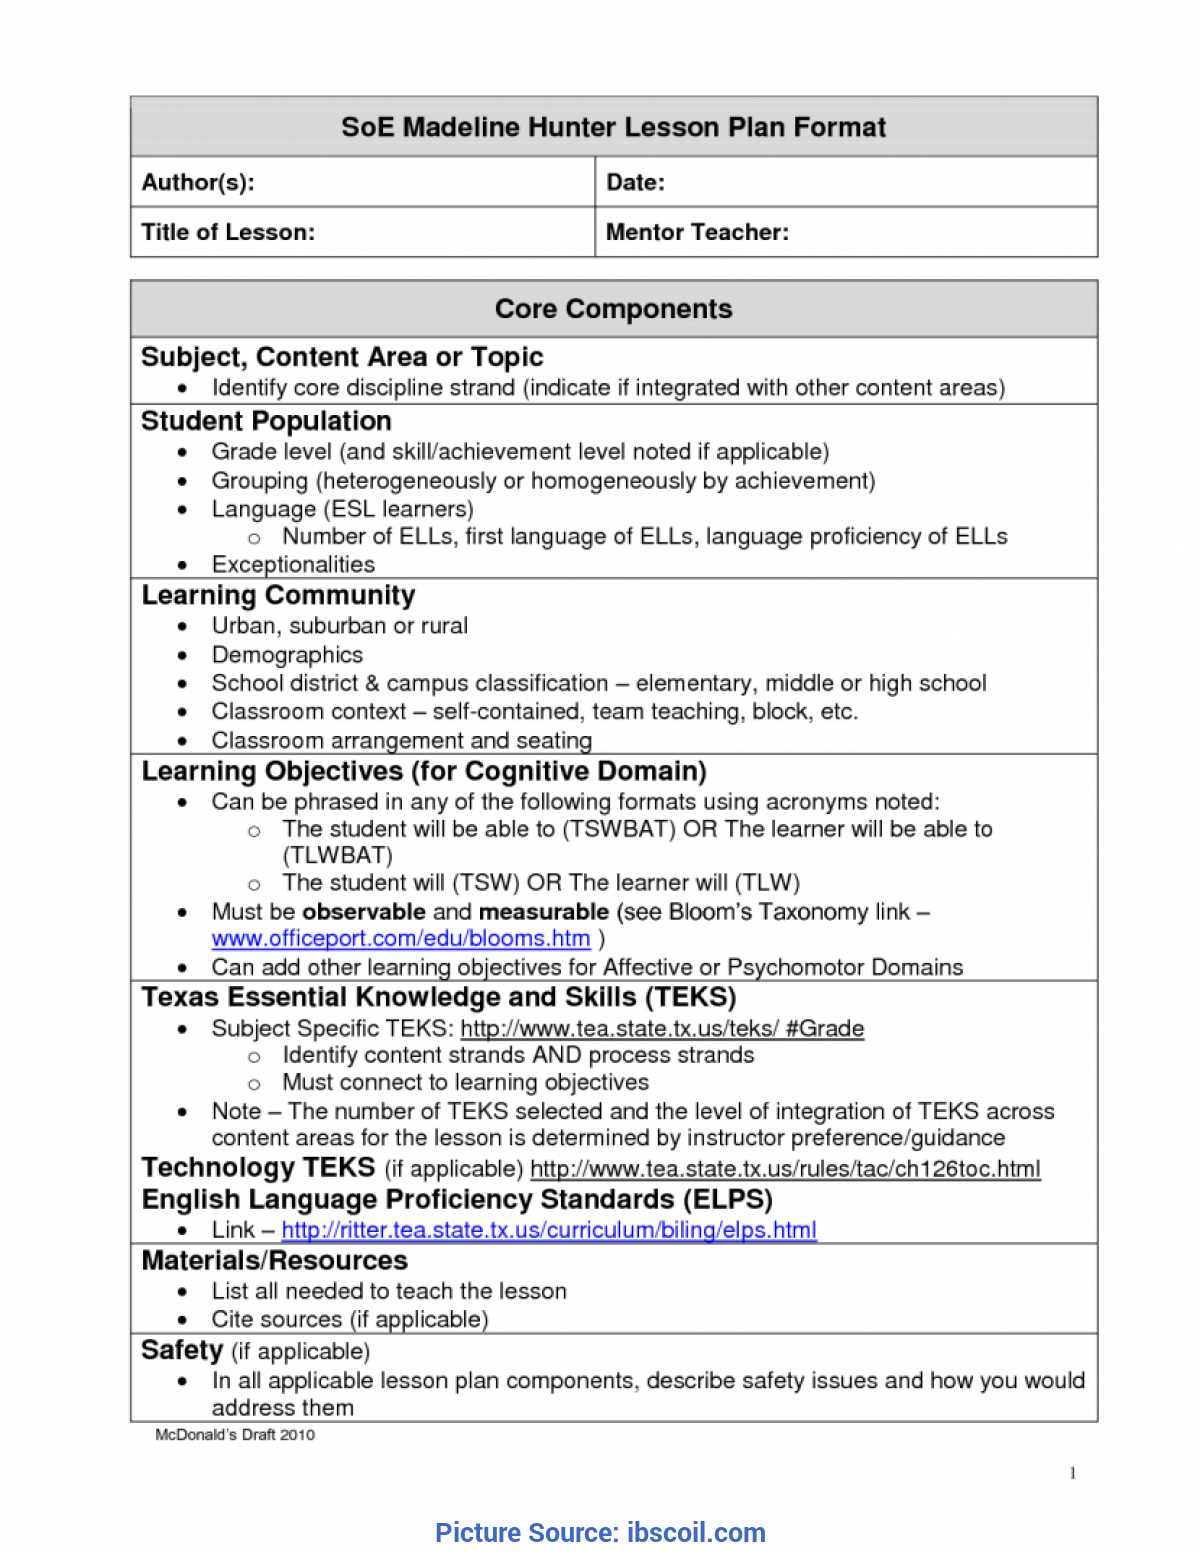 Madeline Hunter Lesson Plan Template Twiroo Com | Lesso Within Madeline Hunter Lesson Plan Blank Template